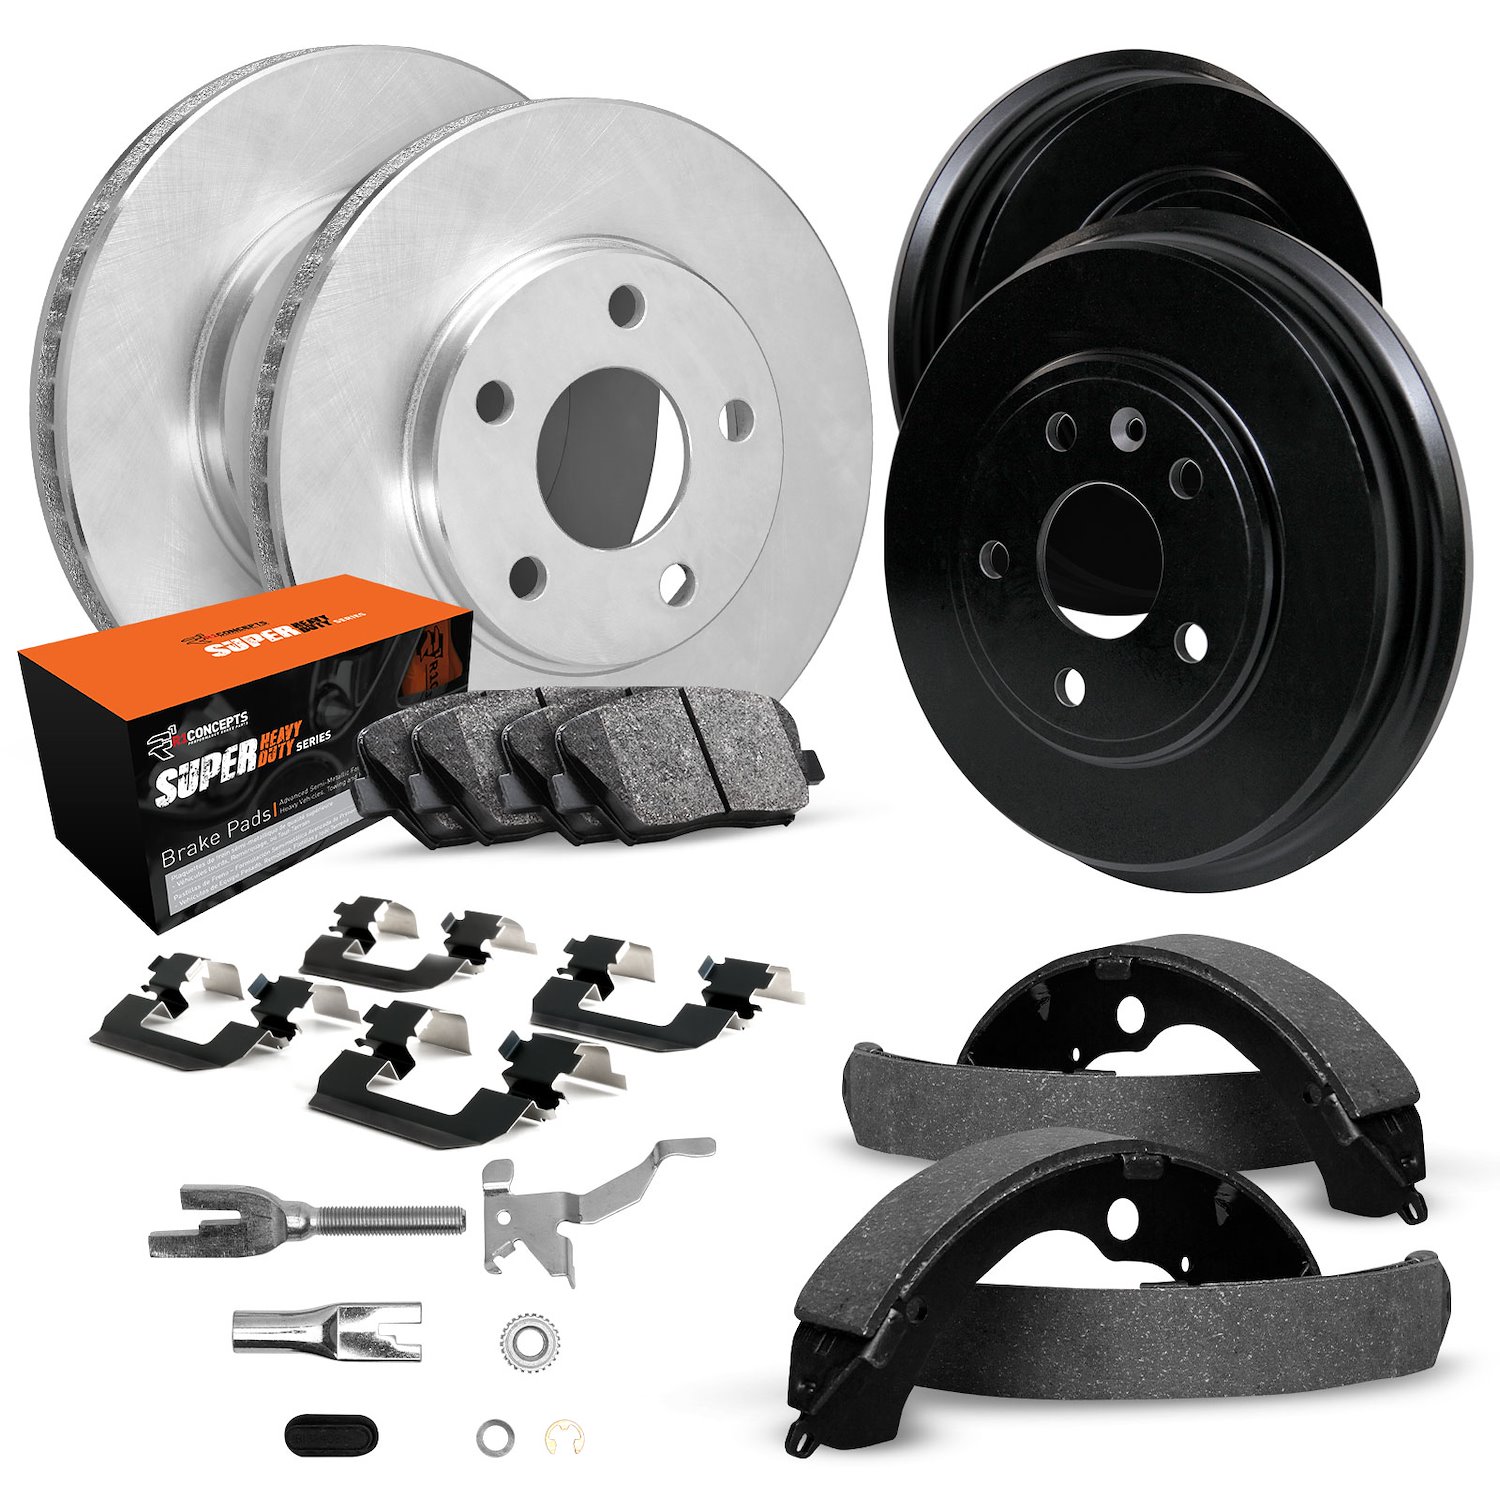 E-Line Blank Brake Rotor & Drum Set w/Super-Duty Pads, Shoes, Hardware, & Adjusters, 1991-1991 GM, Position: Front & Rear